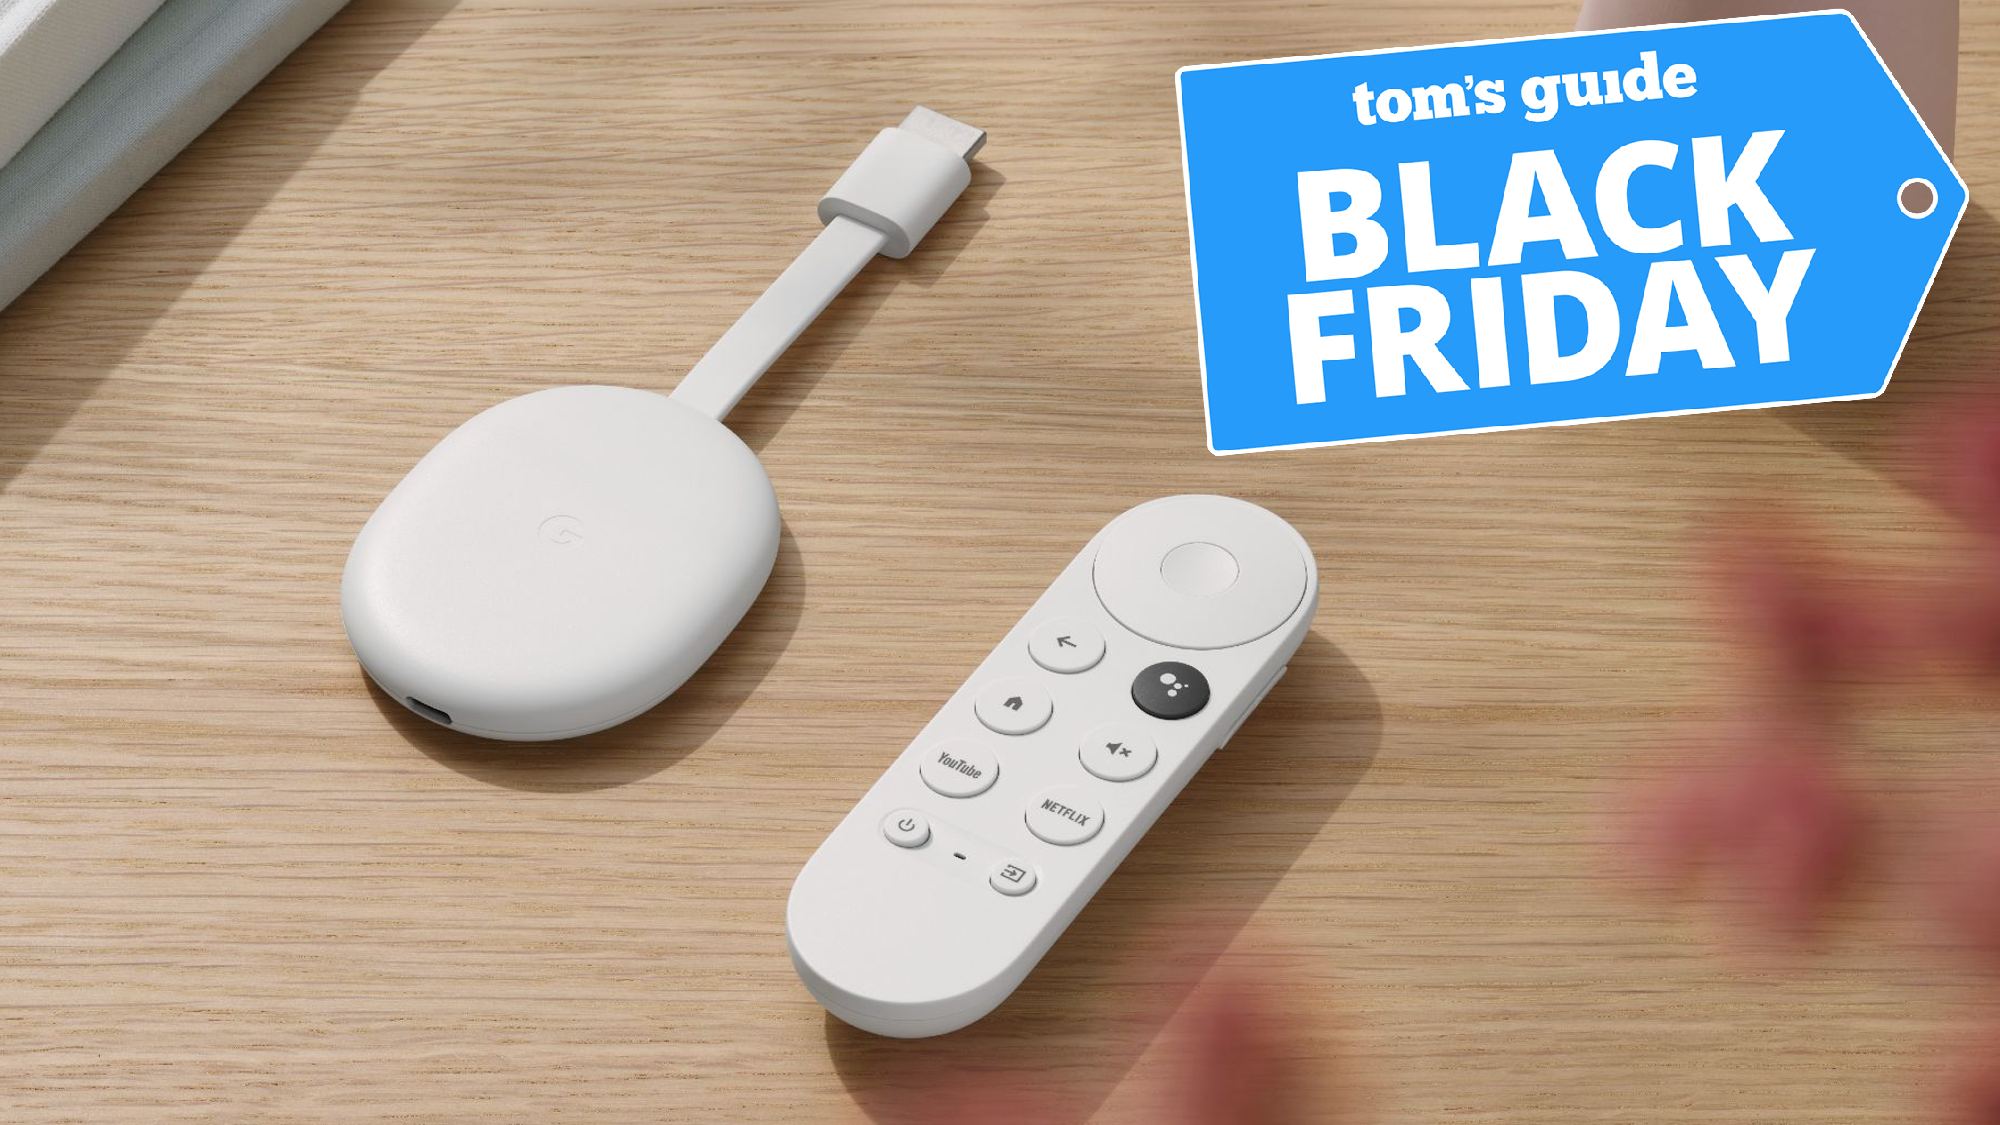 The 4K Chromecast with Google TV drops to a new low of $38 for Black Friday